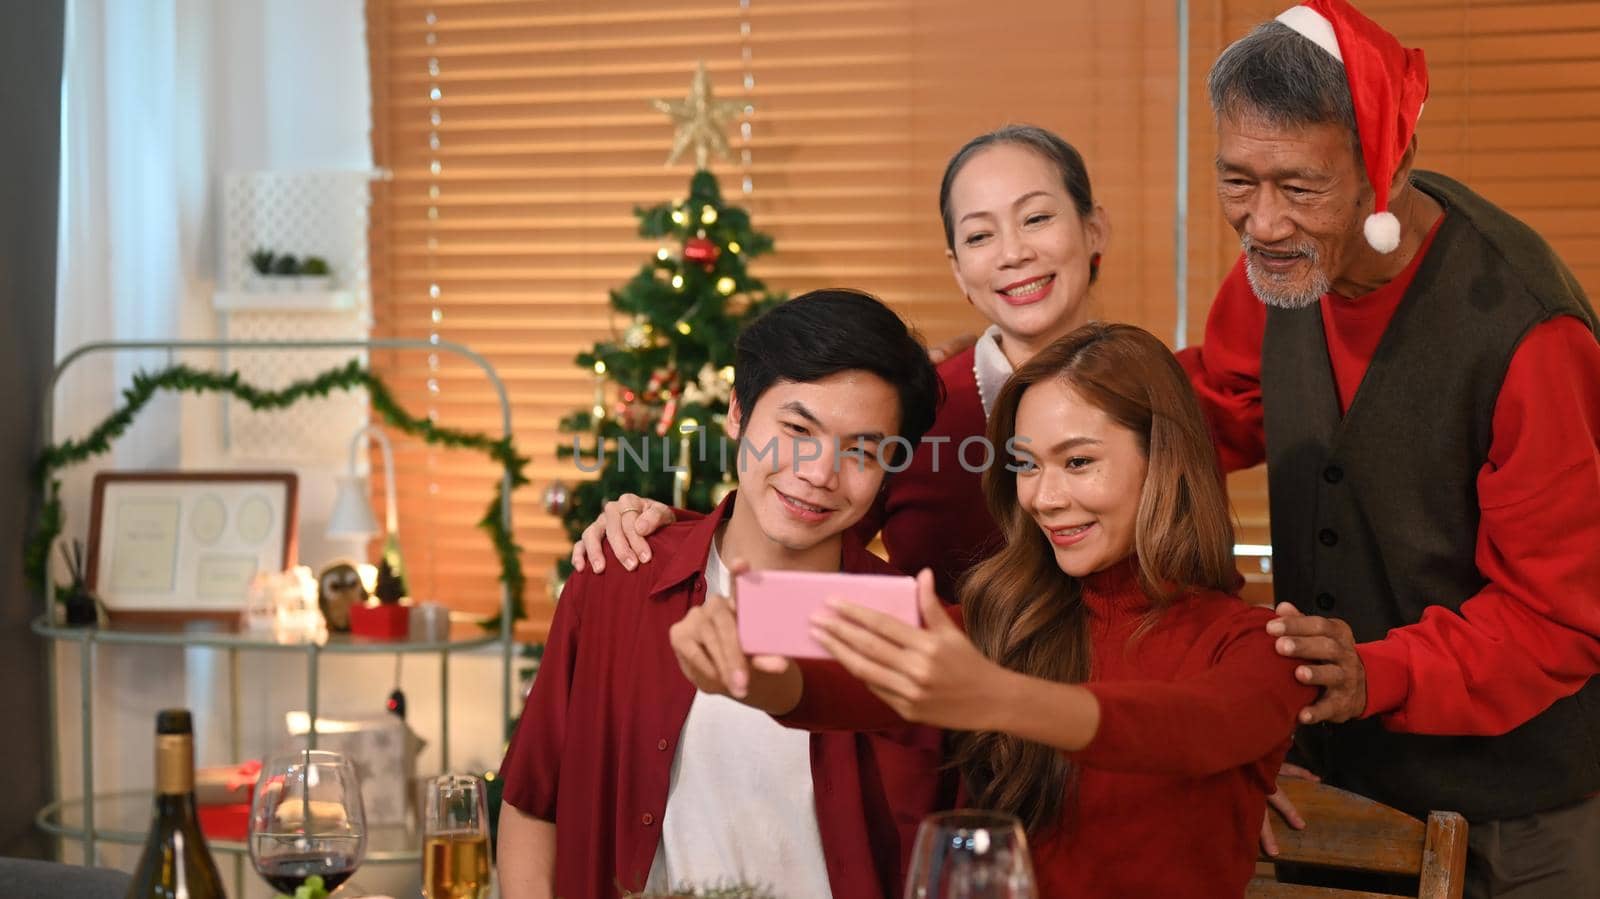 Image of happy family celebrating Christmas together at home lighted with soft lights and candles. Celebration, holidays and people concept.